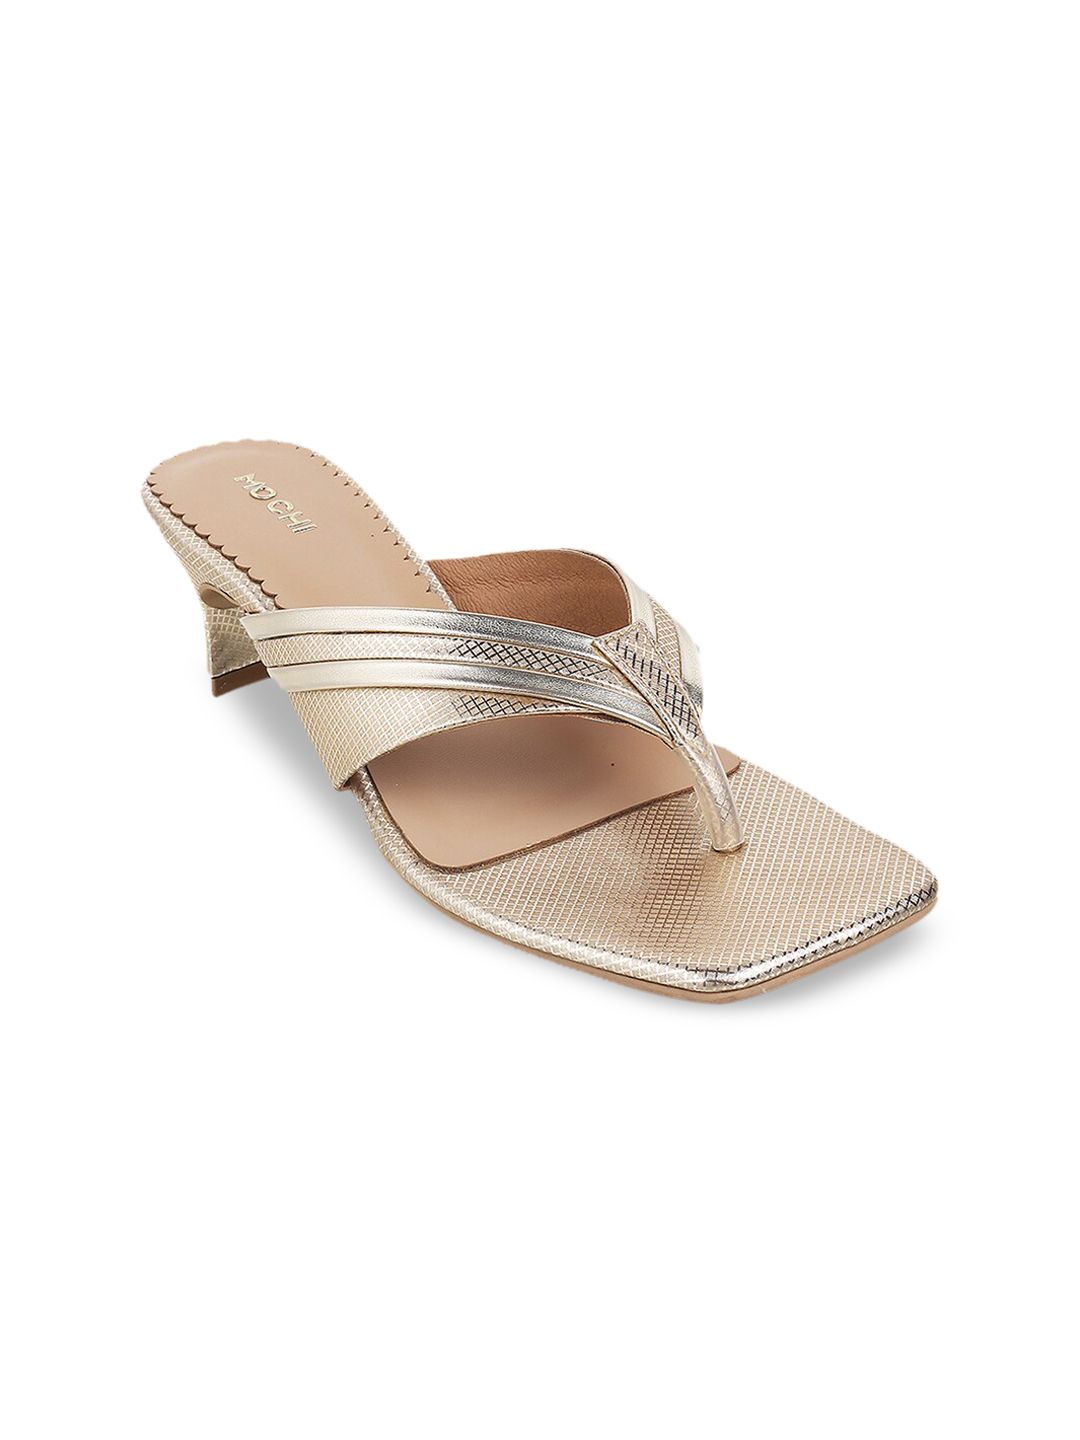 Mochi Women Gold-Toned Embellished Kitten Sandals Price in India